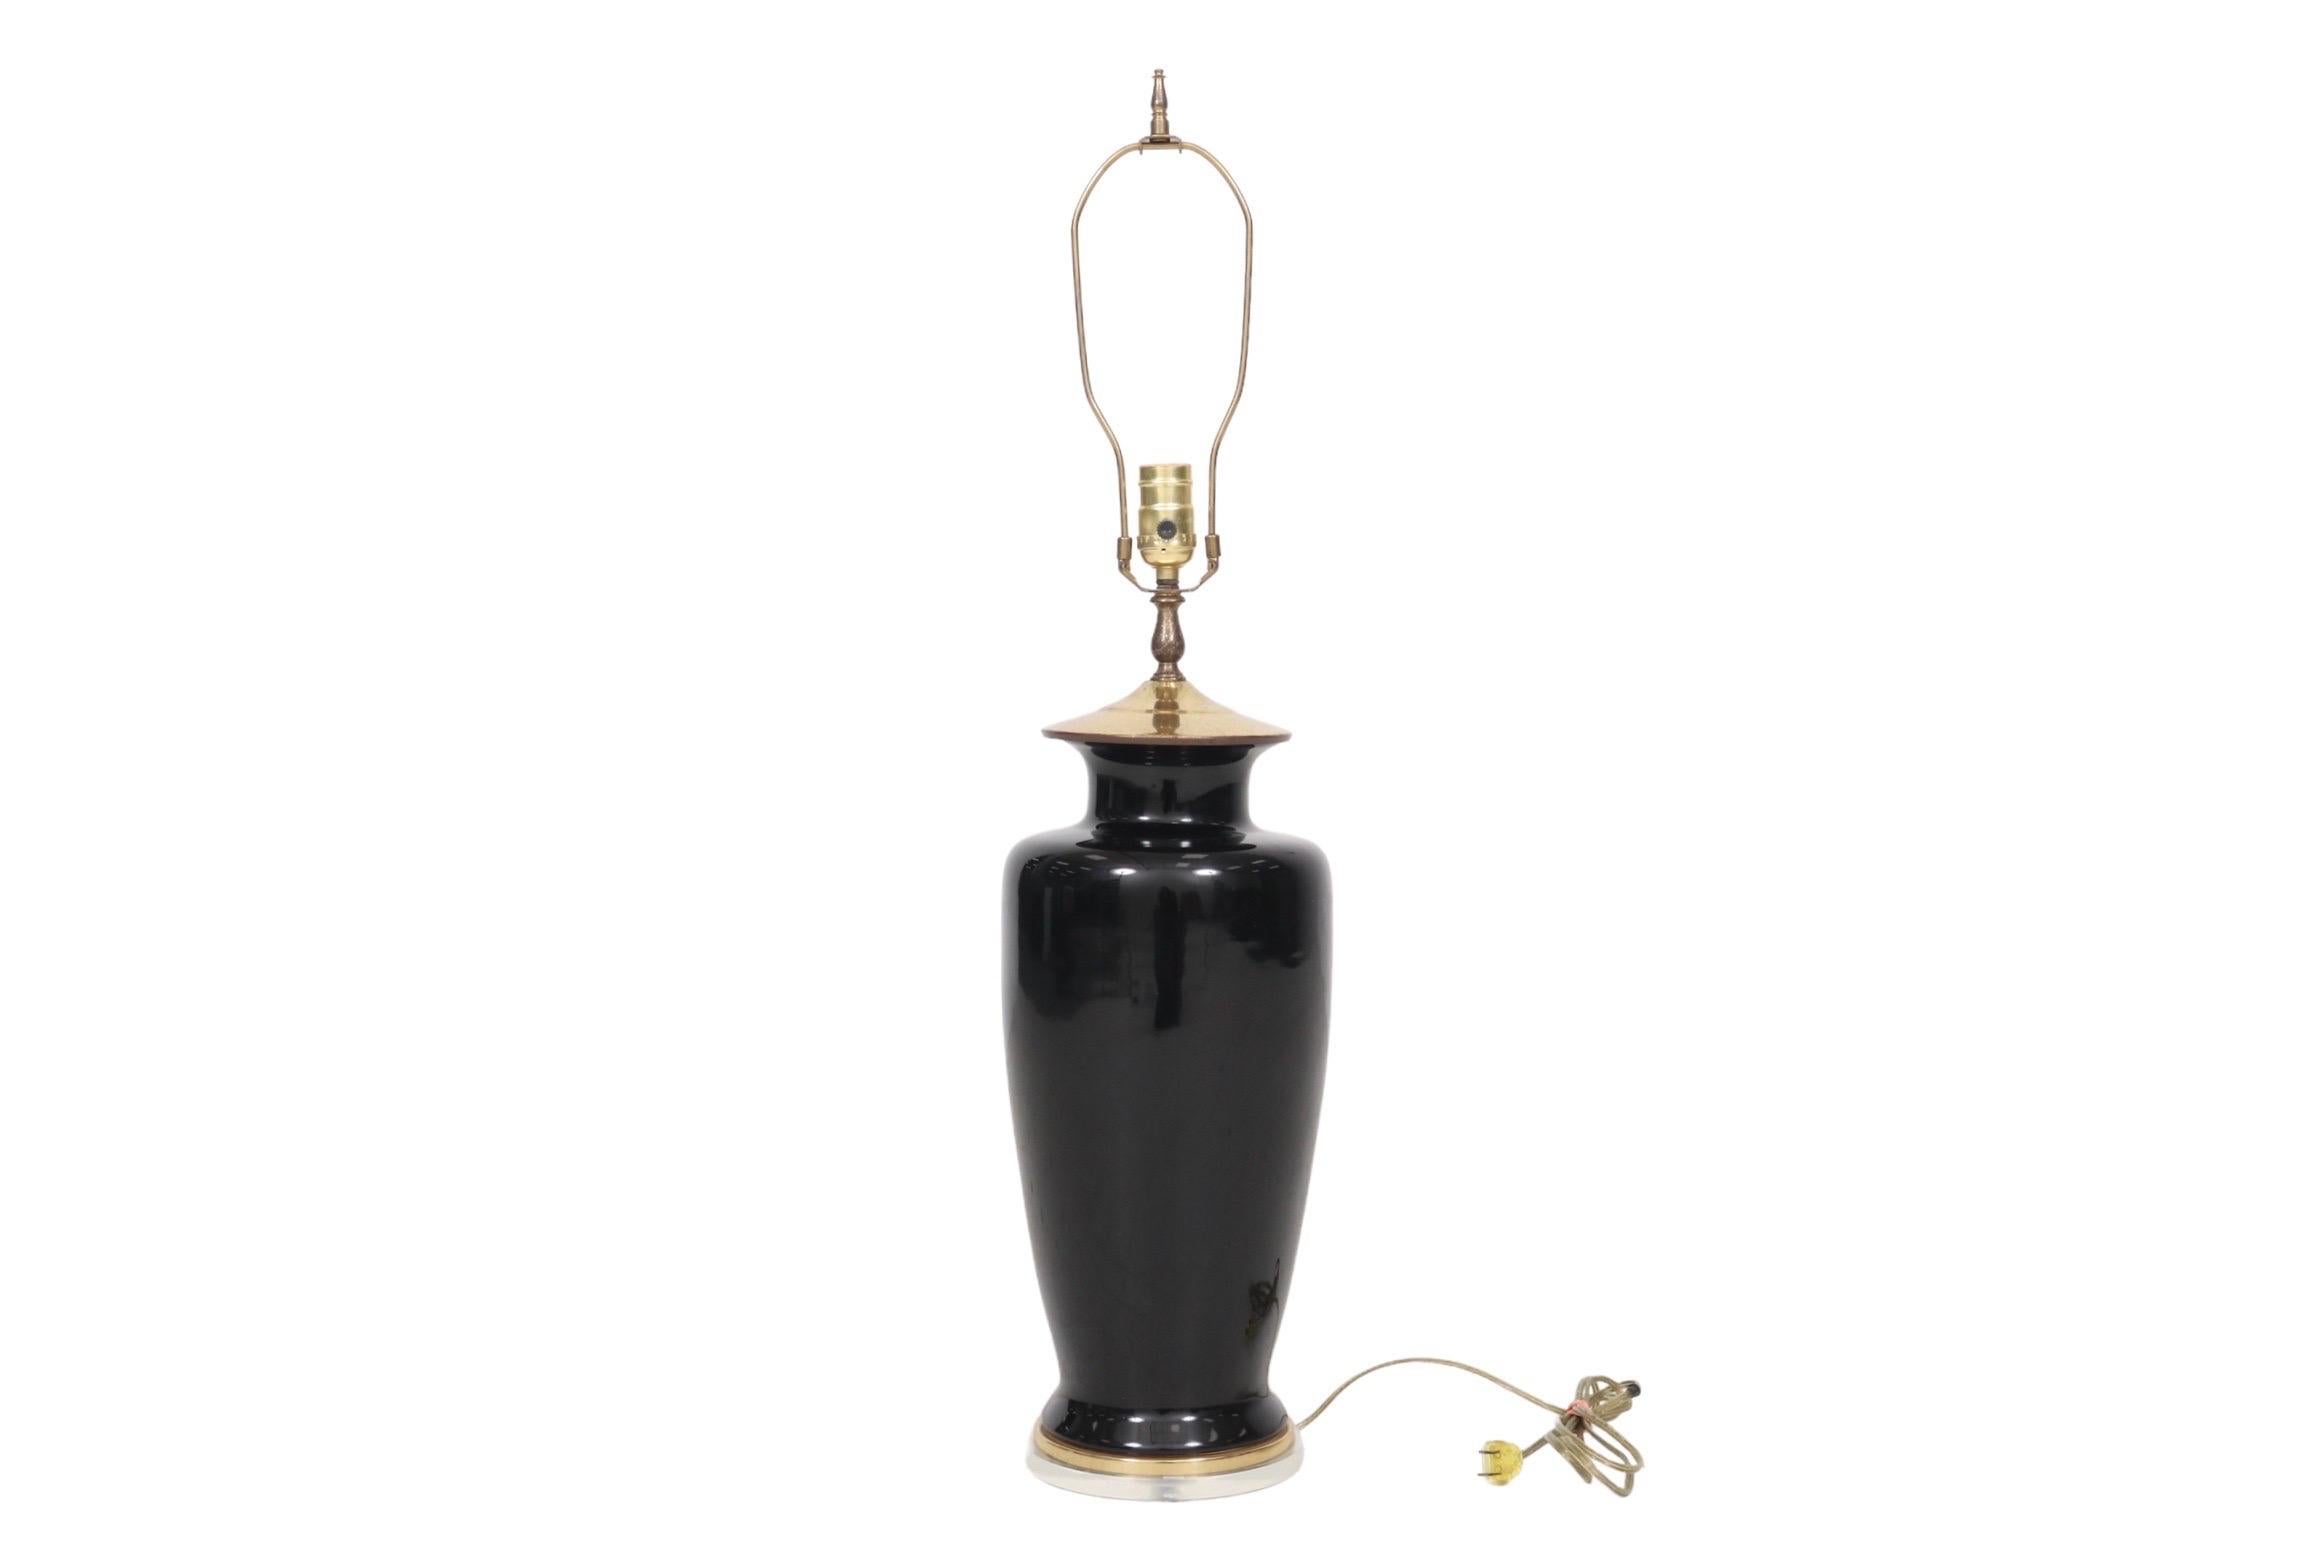 A Hollywood Regency style table lamp. The black baluster vase is ceramic with a brass cap and foot over a round lucite base. Measures 7.5”W x 7.5”D x 23.25